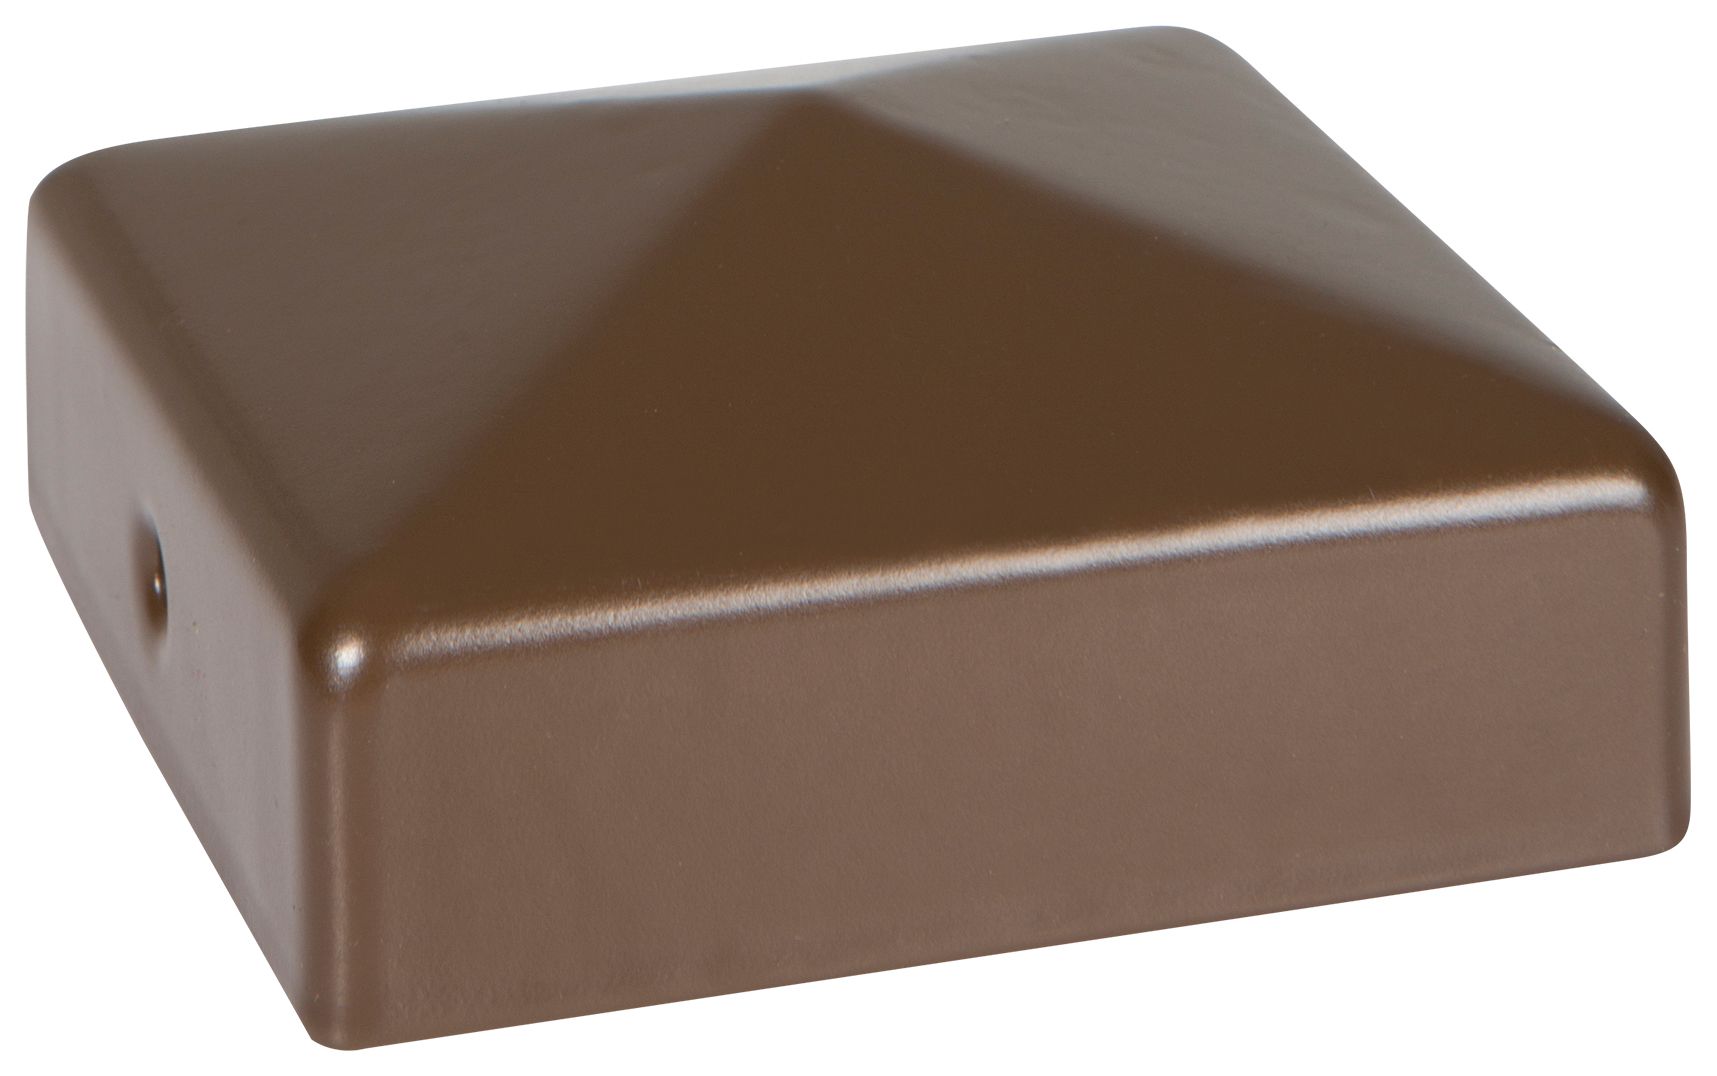 Image of DuraPost Sepia Brown Post Cap with Bracket - 75mm x 75mm